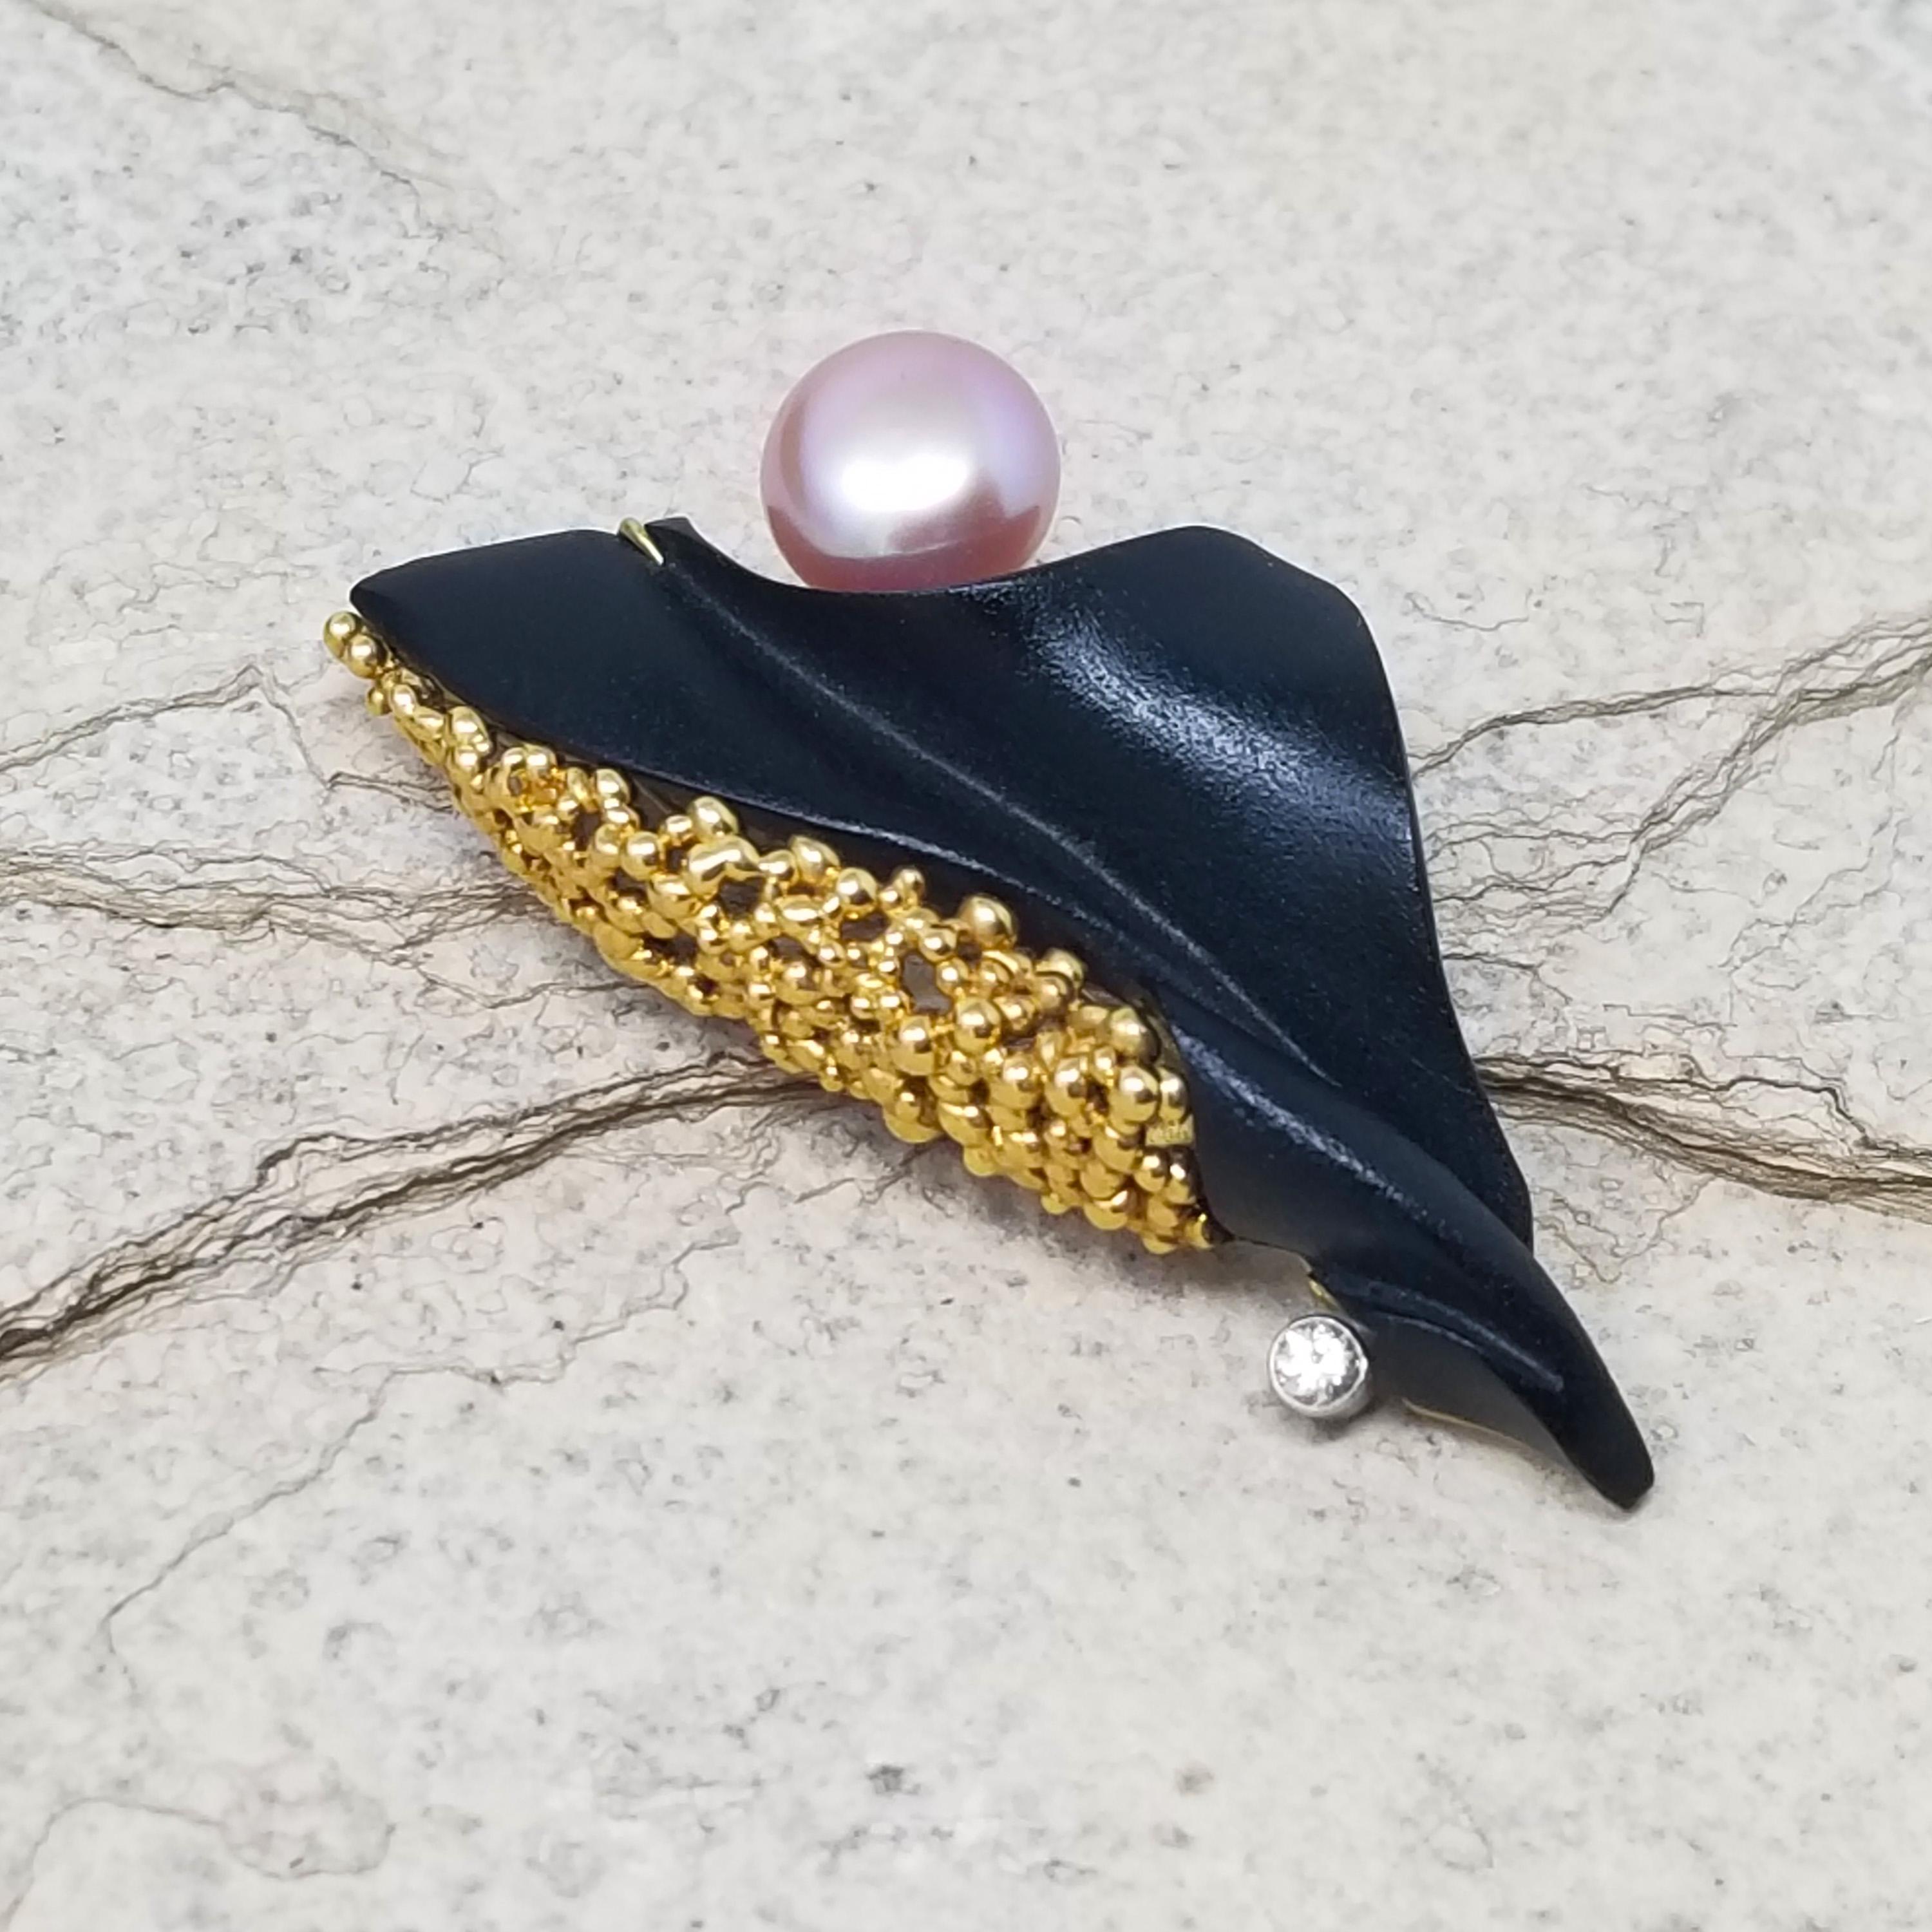 This brooch features a sculpture of languid undulations, carved by renowned American lapidary artist Steve Walters. As with all his carvings, this black chalcedony is elegance personified. The gemstone is finished in a texture reminiscent of